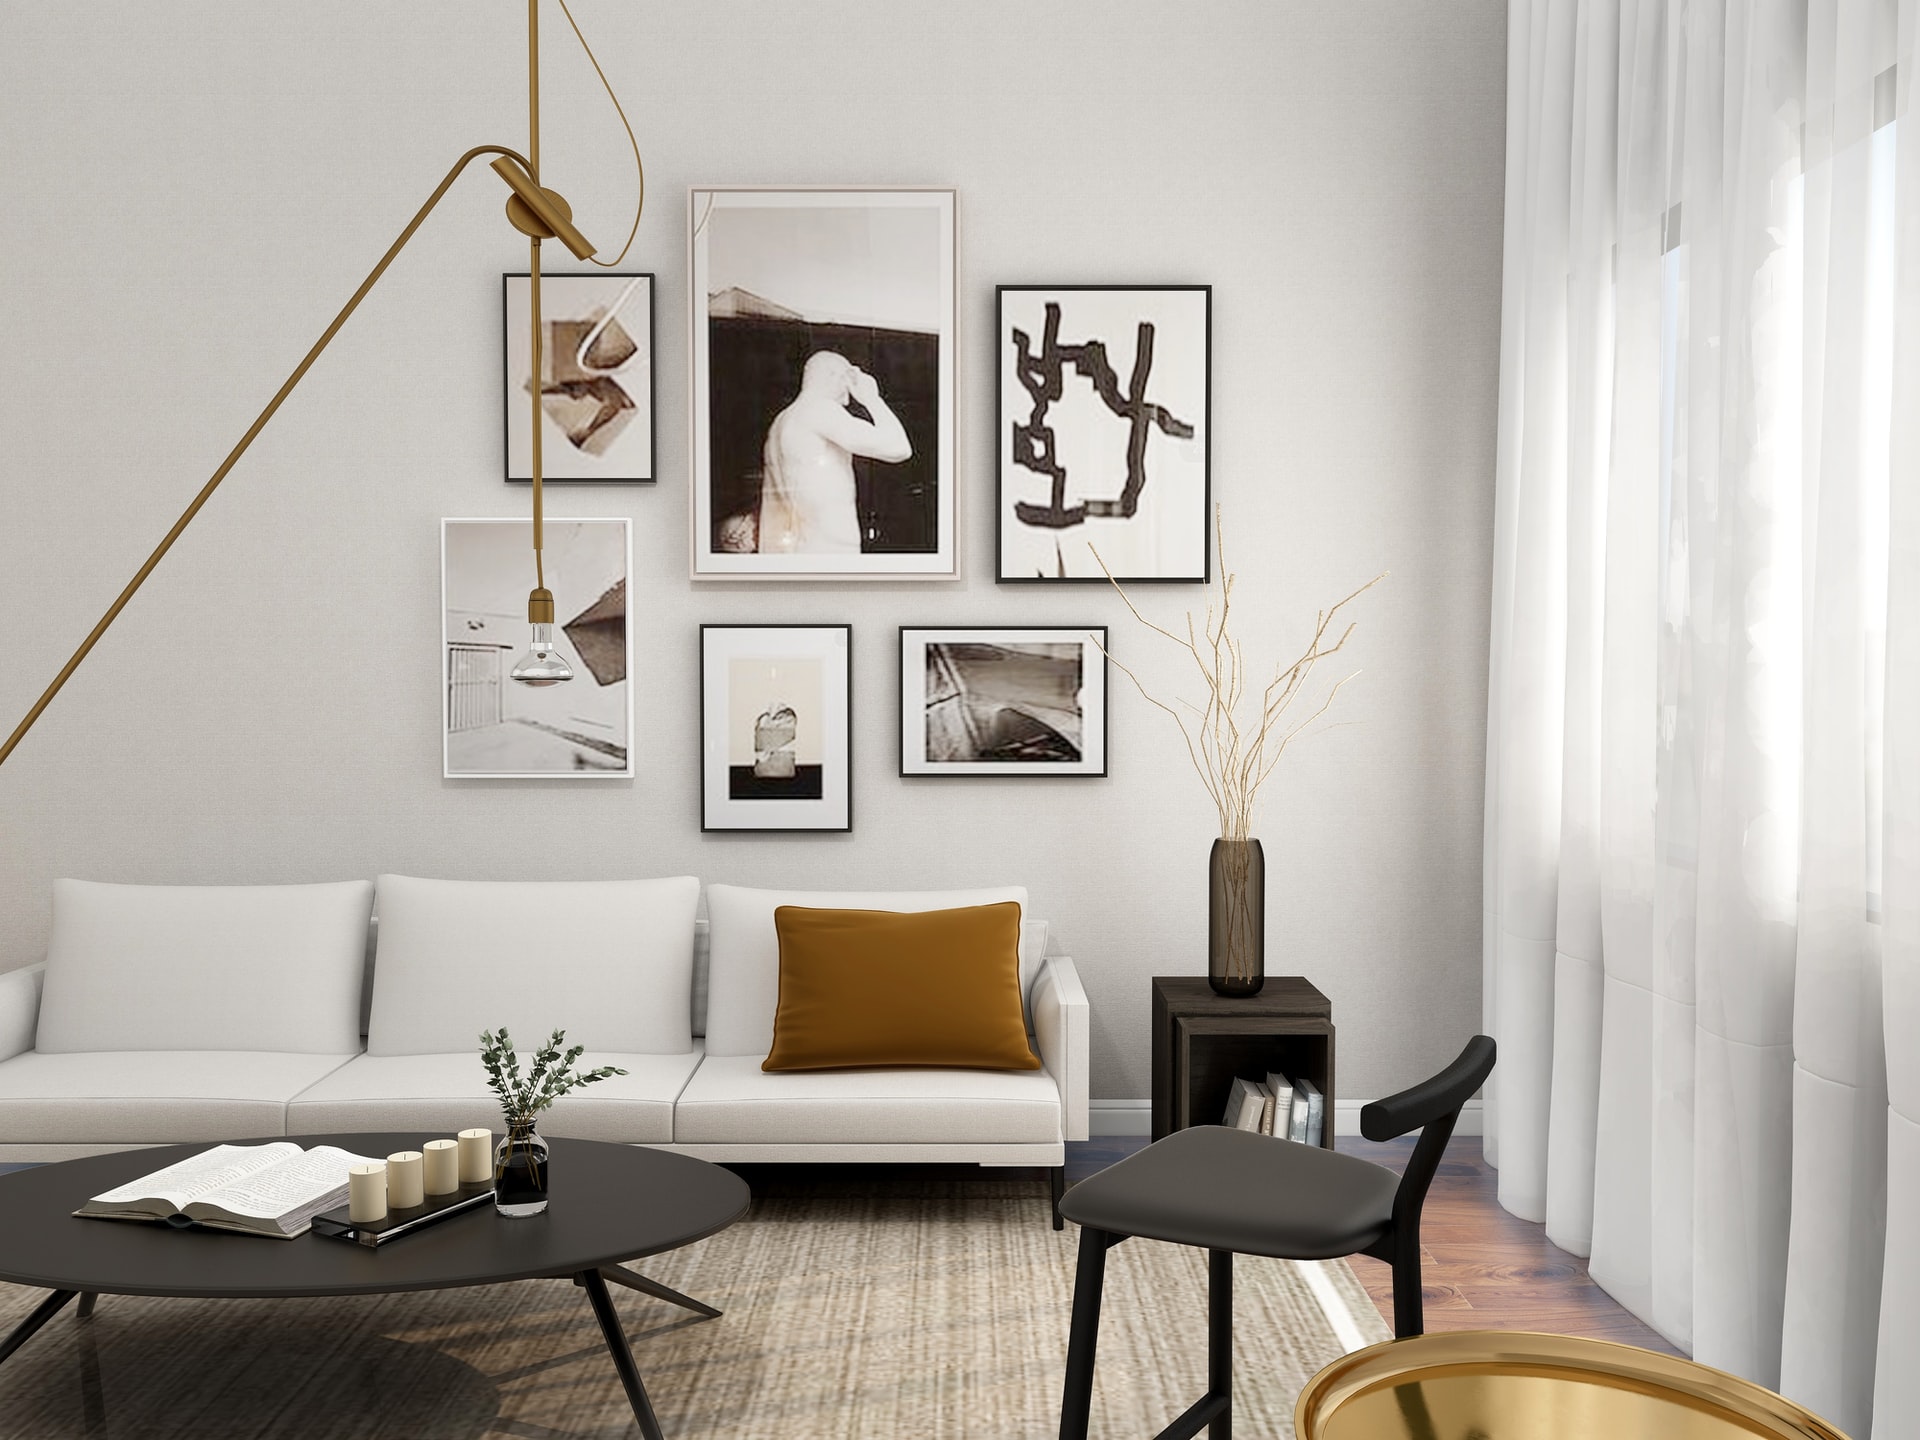 Home Decor Online: How to Shop for the Perfect Pieces